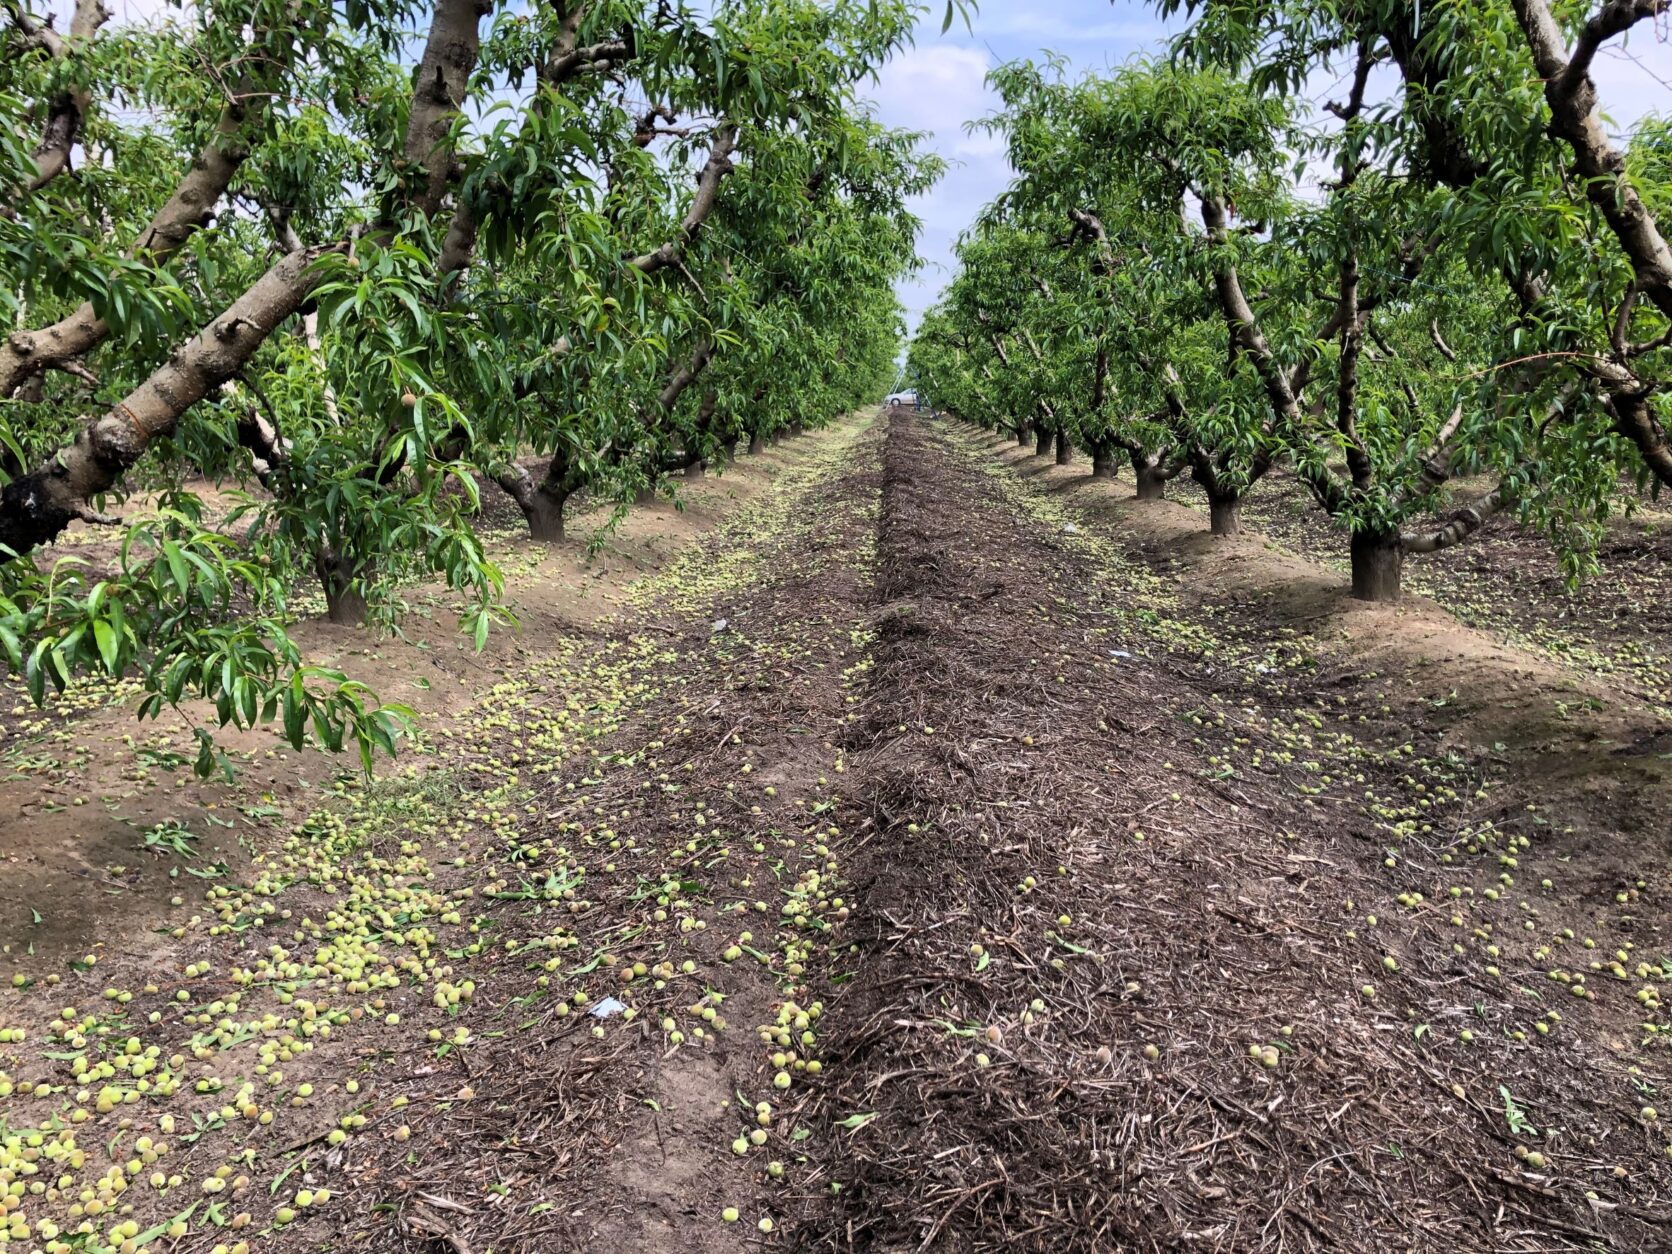 Two rows of trees showing hand thinned fruit on the ground